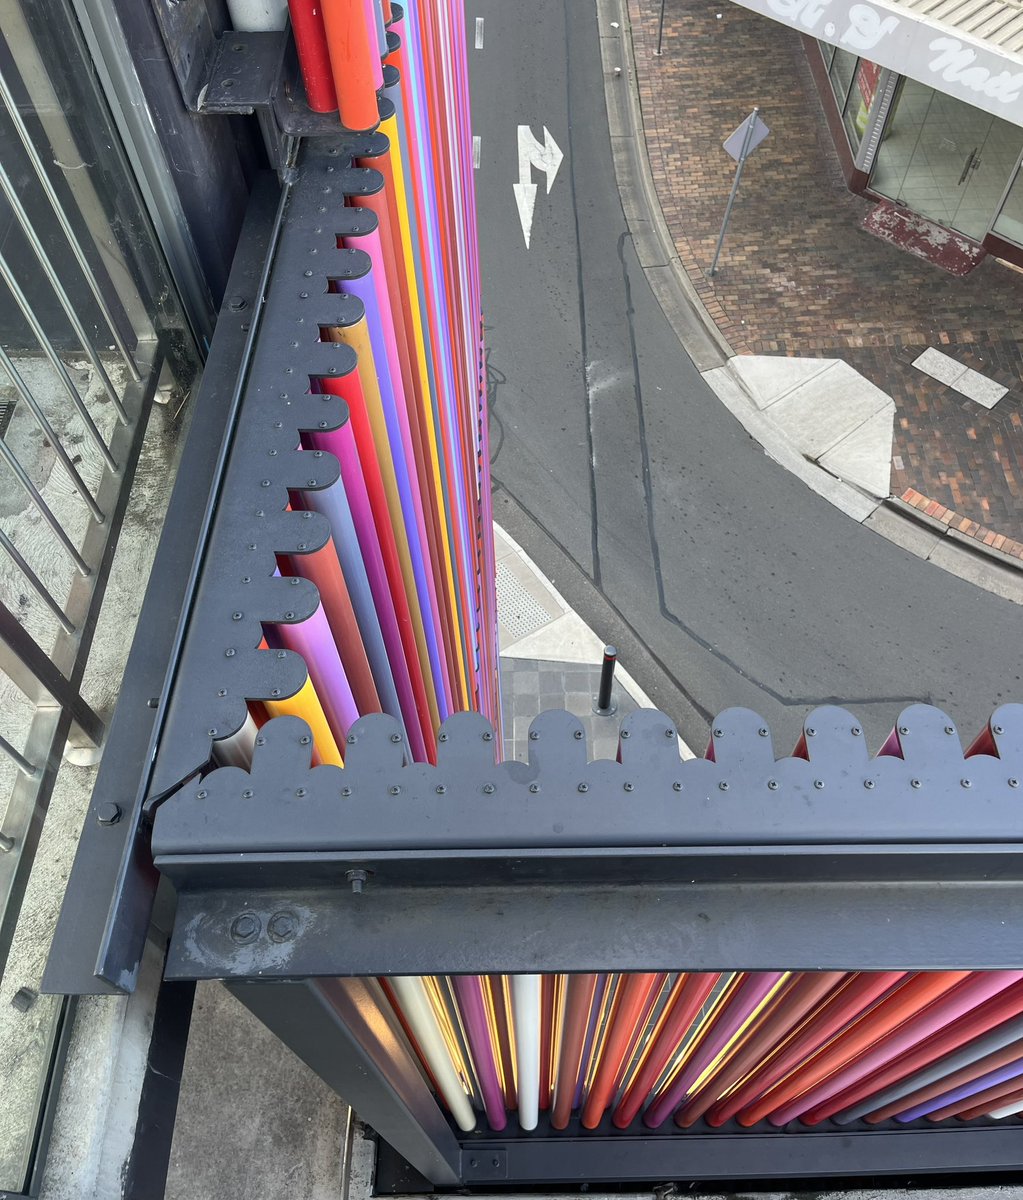 Colourful Cabramatta Carpark;
Architects @collins_turner additions & new wing, adding vibrantly coloured tubes to the facades on all sides.
Great street presence, signage, open alley through to shops beyond, successfully links 3 parts into 1 coherent scheme
#publicsydney